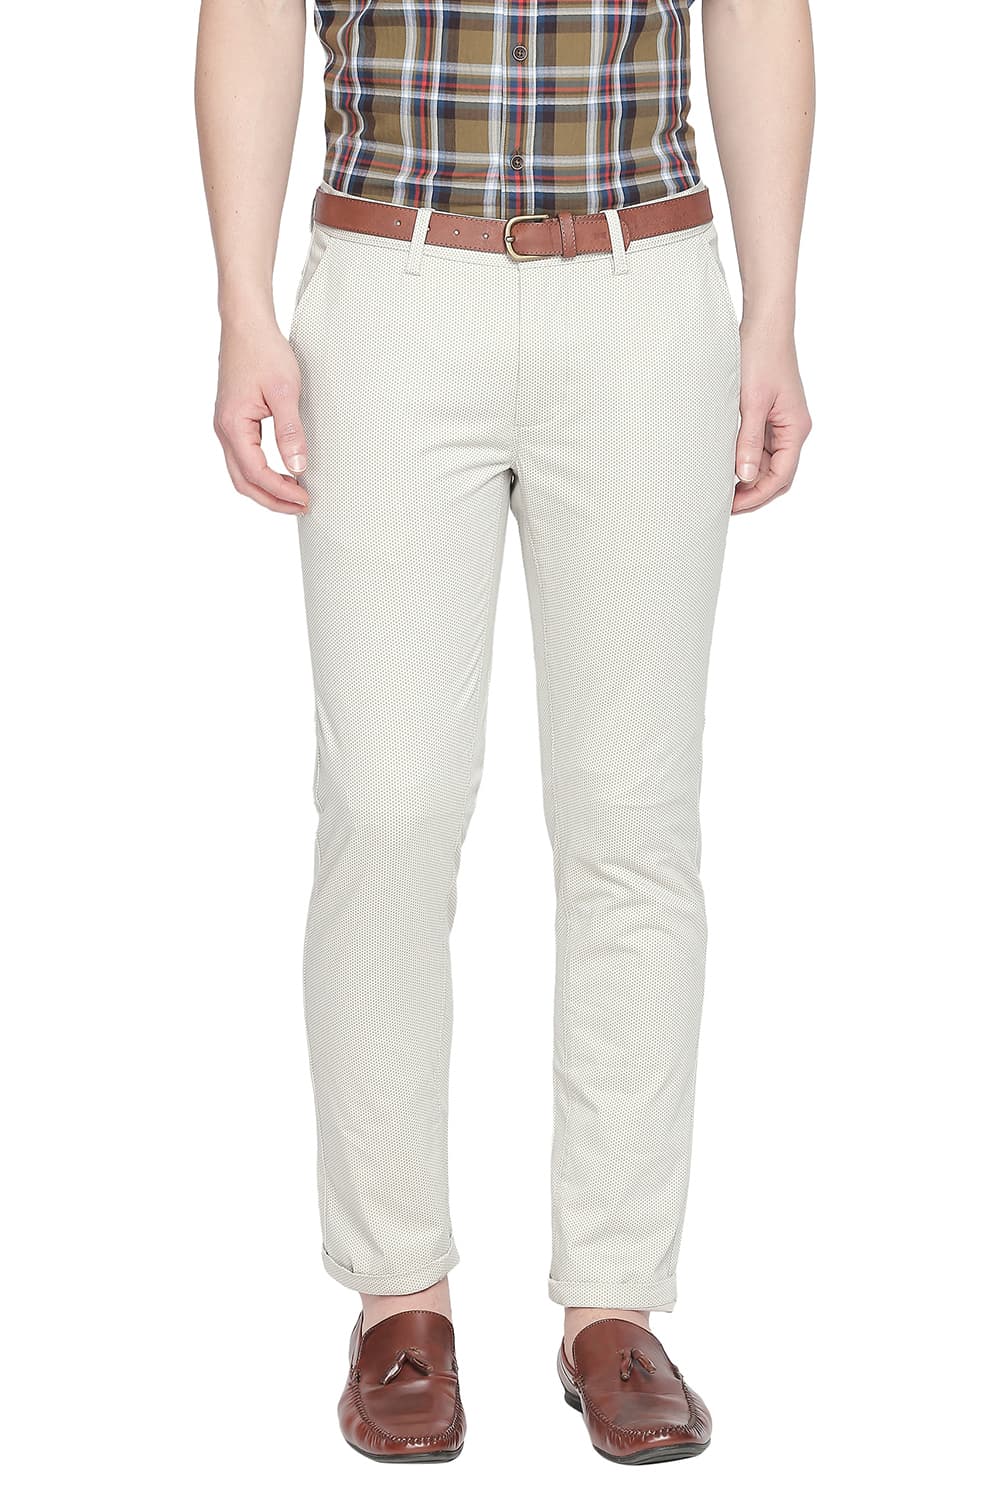 BASICS TAPERED FIT PRINTED STRETCH TROUSER WITH BELT